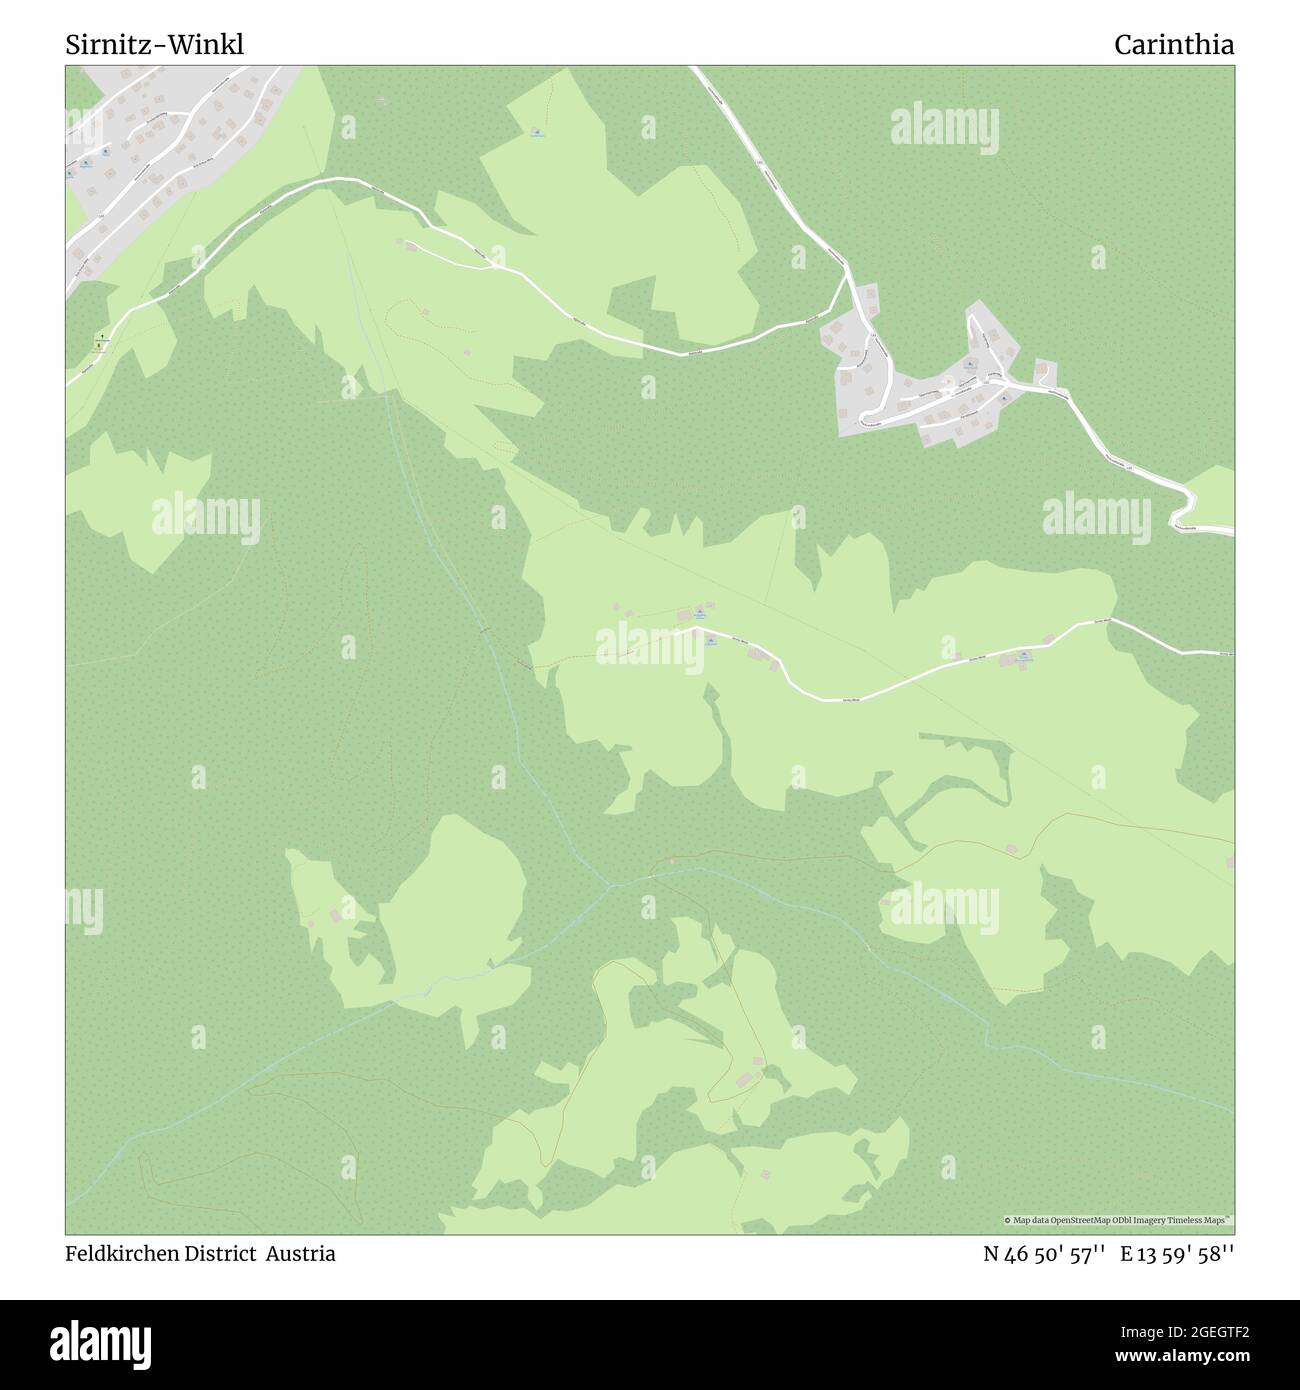 Sirnitz-Winkl, Feldkirchen District, Austria, Carinthia, N 46 50' 57'', E 13 59' 58'', map, Timeless Map published in 2021. Travelers, explorers and adventurers like Florence Nightingale, David Livingstone, Ernest Shackleton, Lewis and Clark and Sherlock Holmes relied on maps to plan travels to the world's most remote corners, Timeless Maps is mapping most locations on the globe, showing the achievement of great dreams Stock Photo